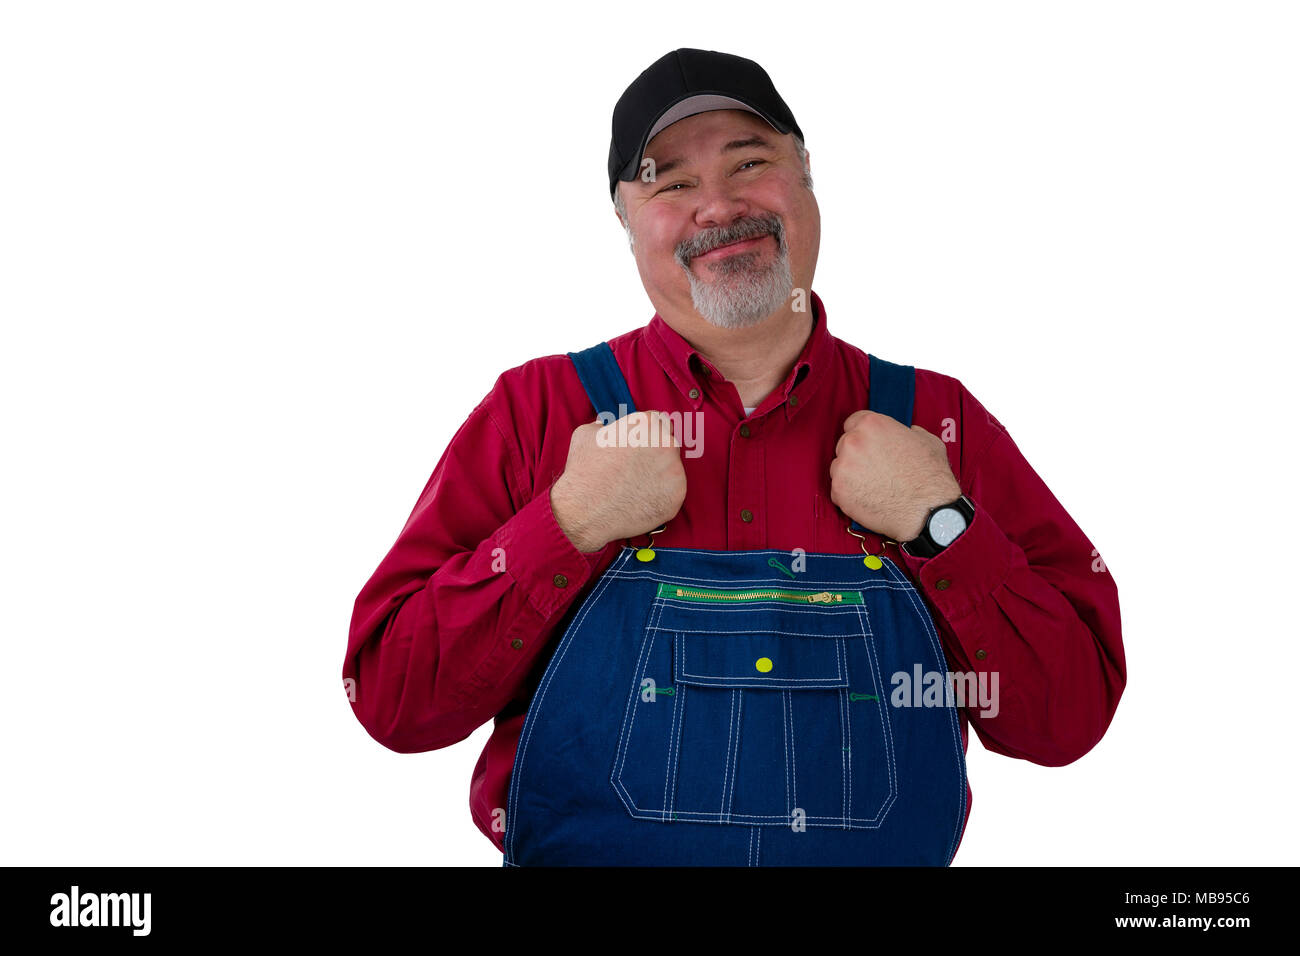 Middle-class farmer, worker, laborer or gardener standing holding the straps on his dungarees looking at the camera with a proud pleased smile isolate Stock Photo